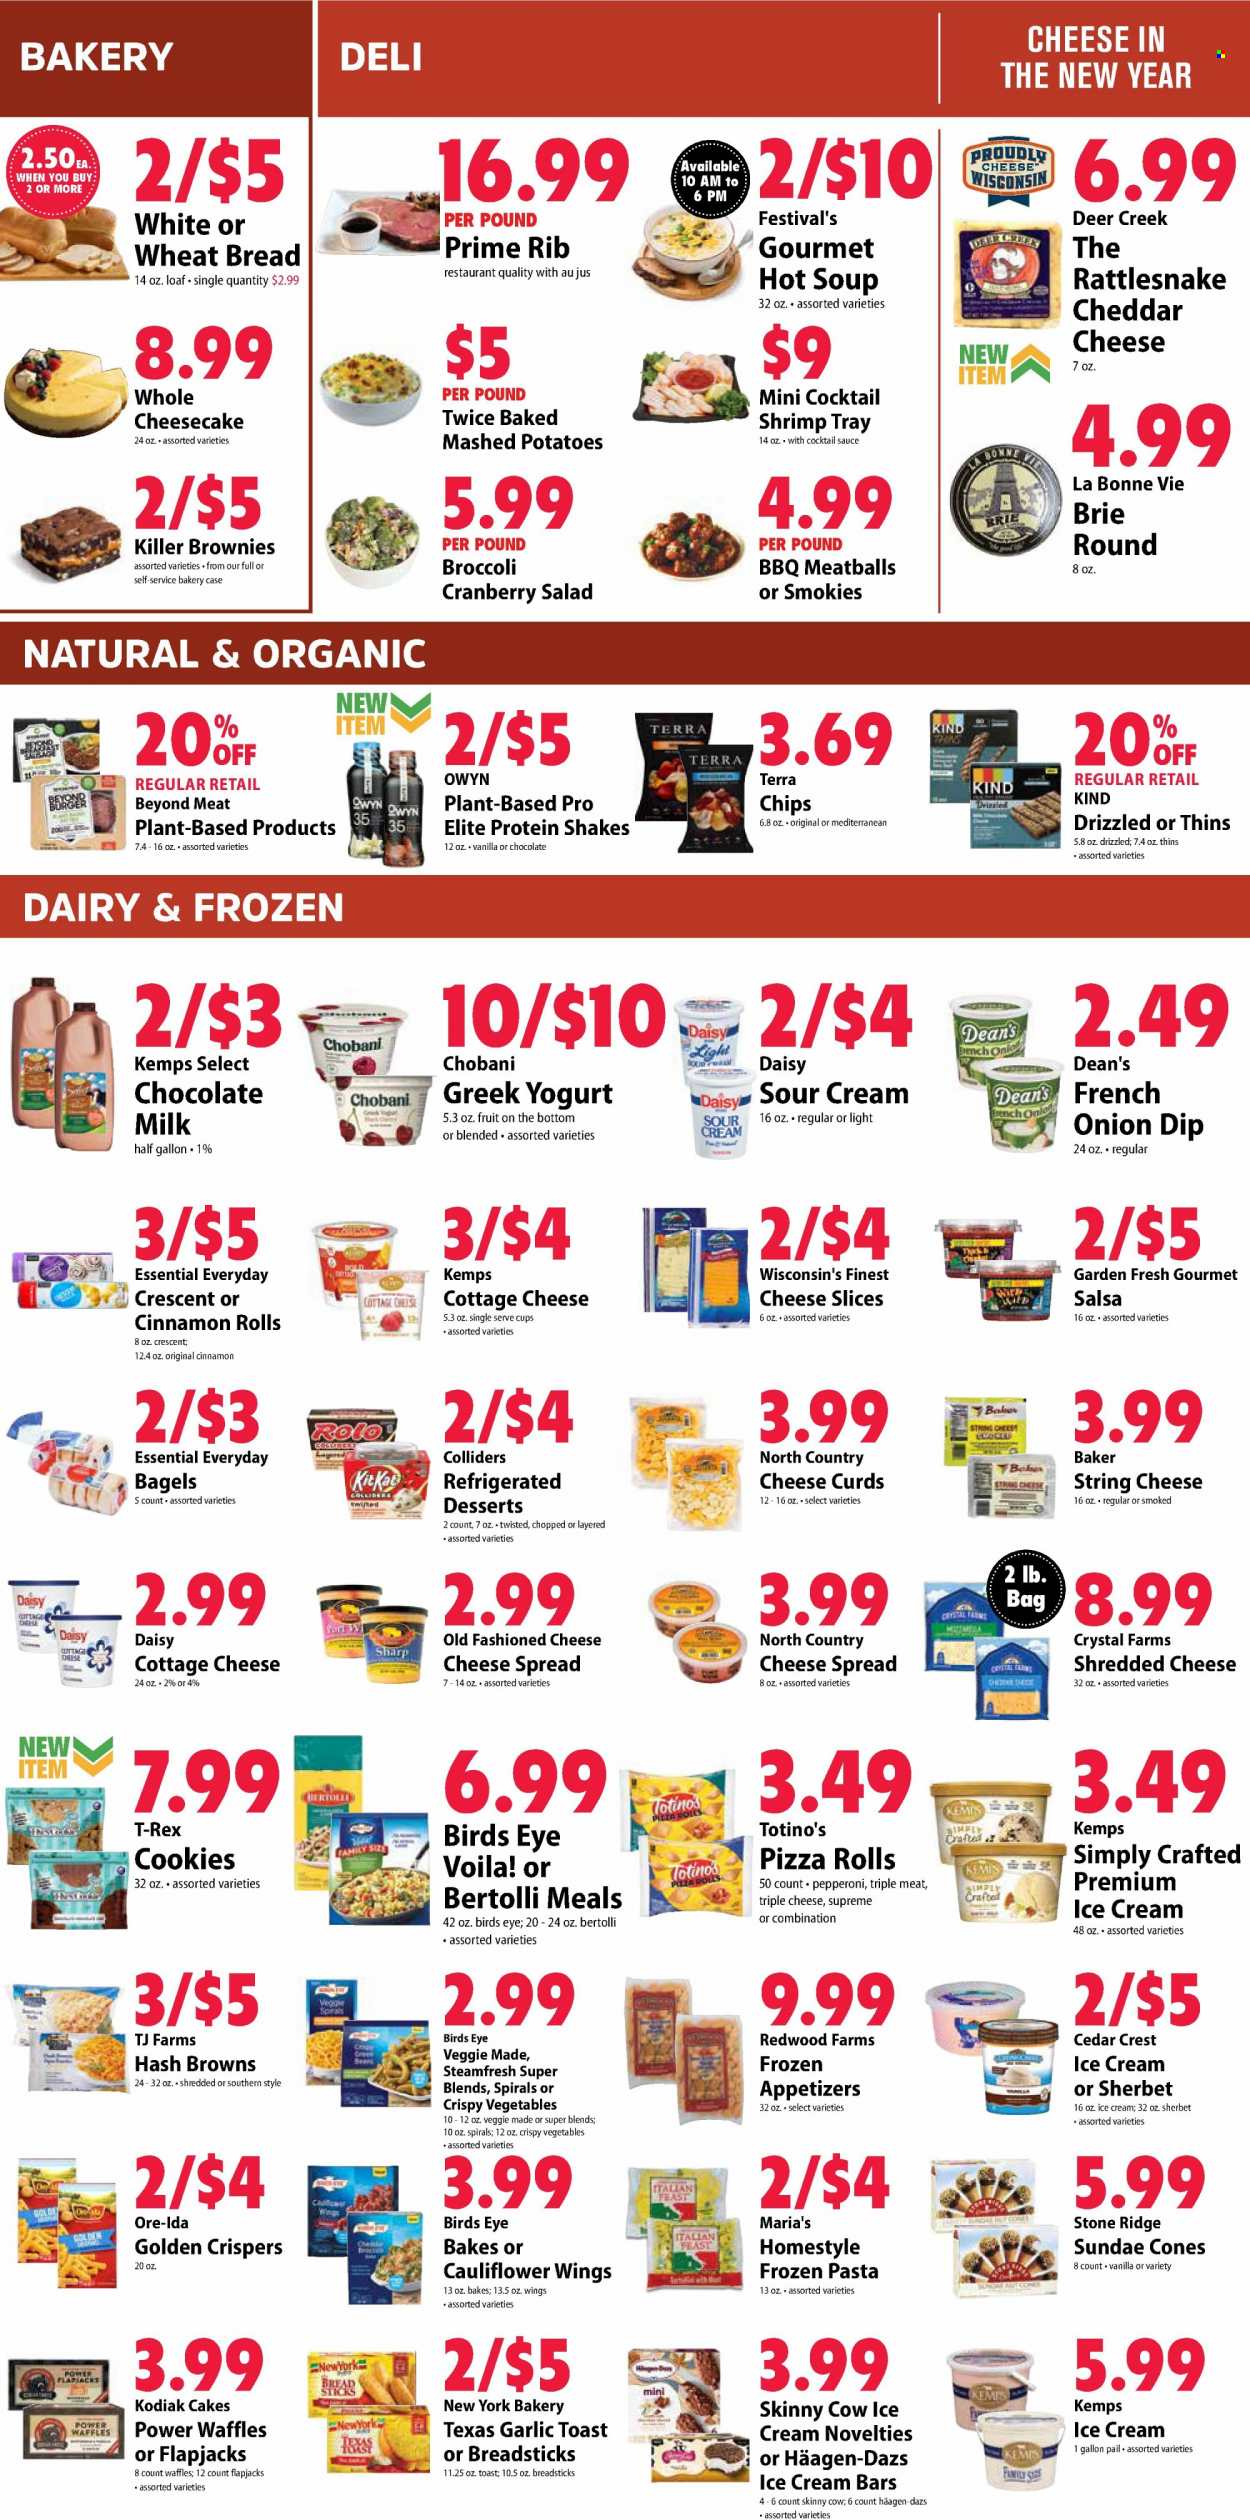 thumbnail - Festival Foods Flyer - 12/29/2021 - 01/04/2022 - Sales products - bagels, wheat bread, cake, pizza rolls, cinnamon roll, brownies, waffles, broccoli, salad, shrimps, mashed potatoes, pizza, meatballs, soup, sauce, Bird's Eye, Bertolli, pepperoni, cheese spread, cottage cheese, shredded cheese, sliced cheese, string cheese, brie, cheese curd, Kemps, greek yoghurt, Chobani, milk, protein drink, shake, sour cream, dip, ice cream, ice cream bars, sherbet, Häagen-Dazs, hash browns, Ore-Ida, milk chocolate, bread sticks, Thins, cocktail sauce, salsa, Crest. Page 3.